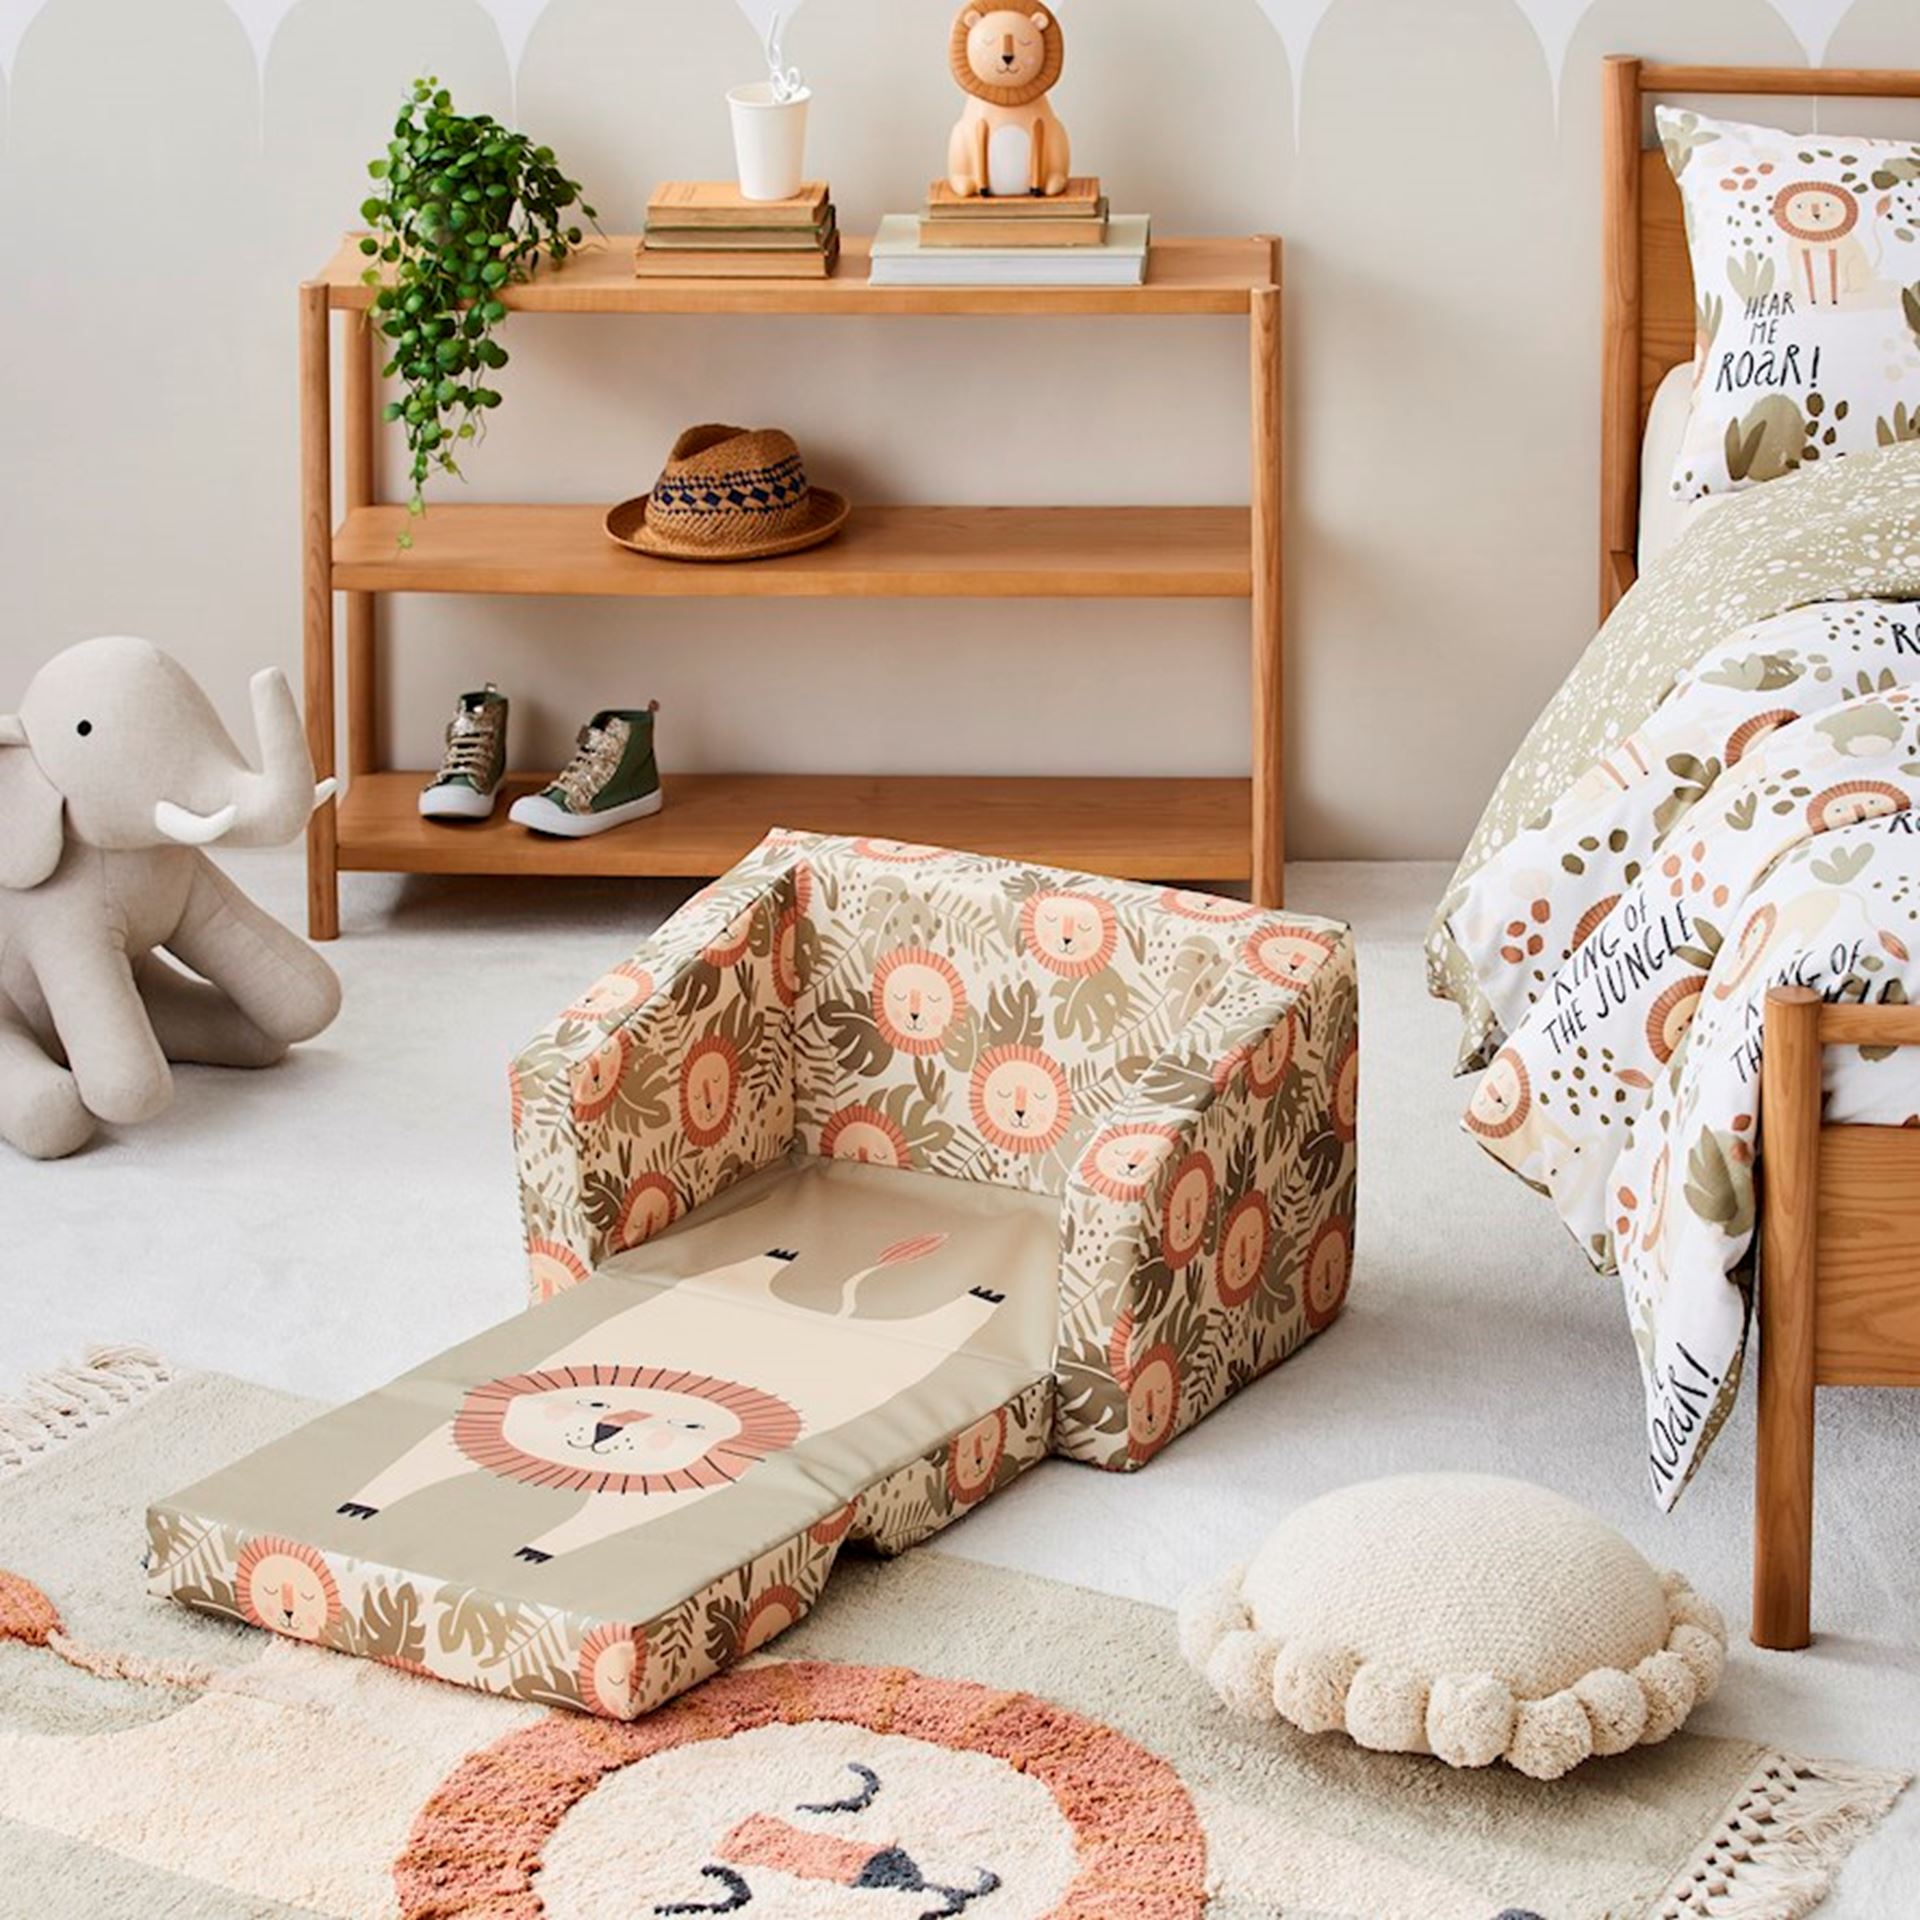 Choosing the Right Kids Furniture for Your Home